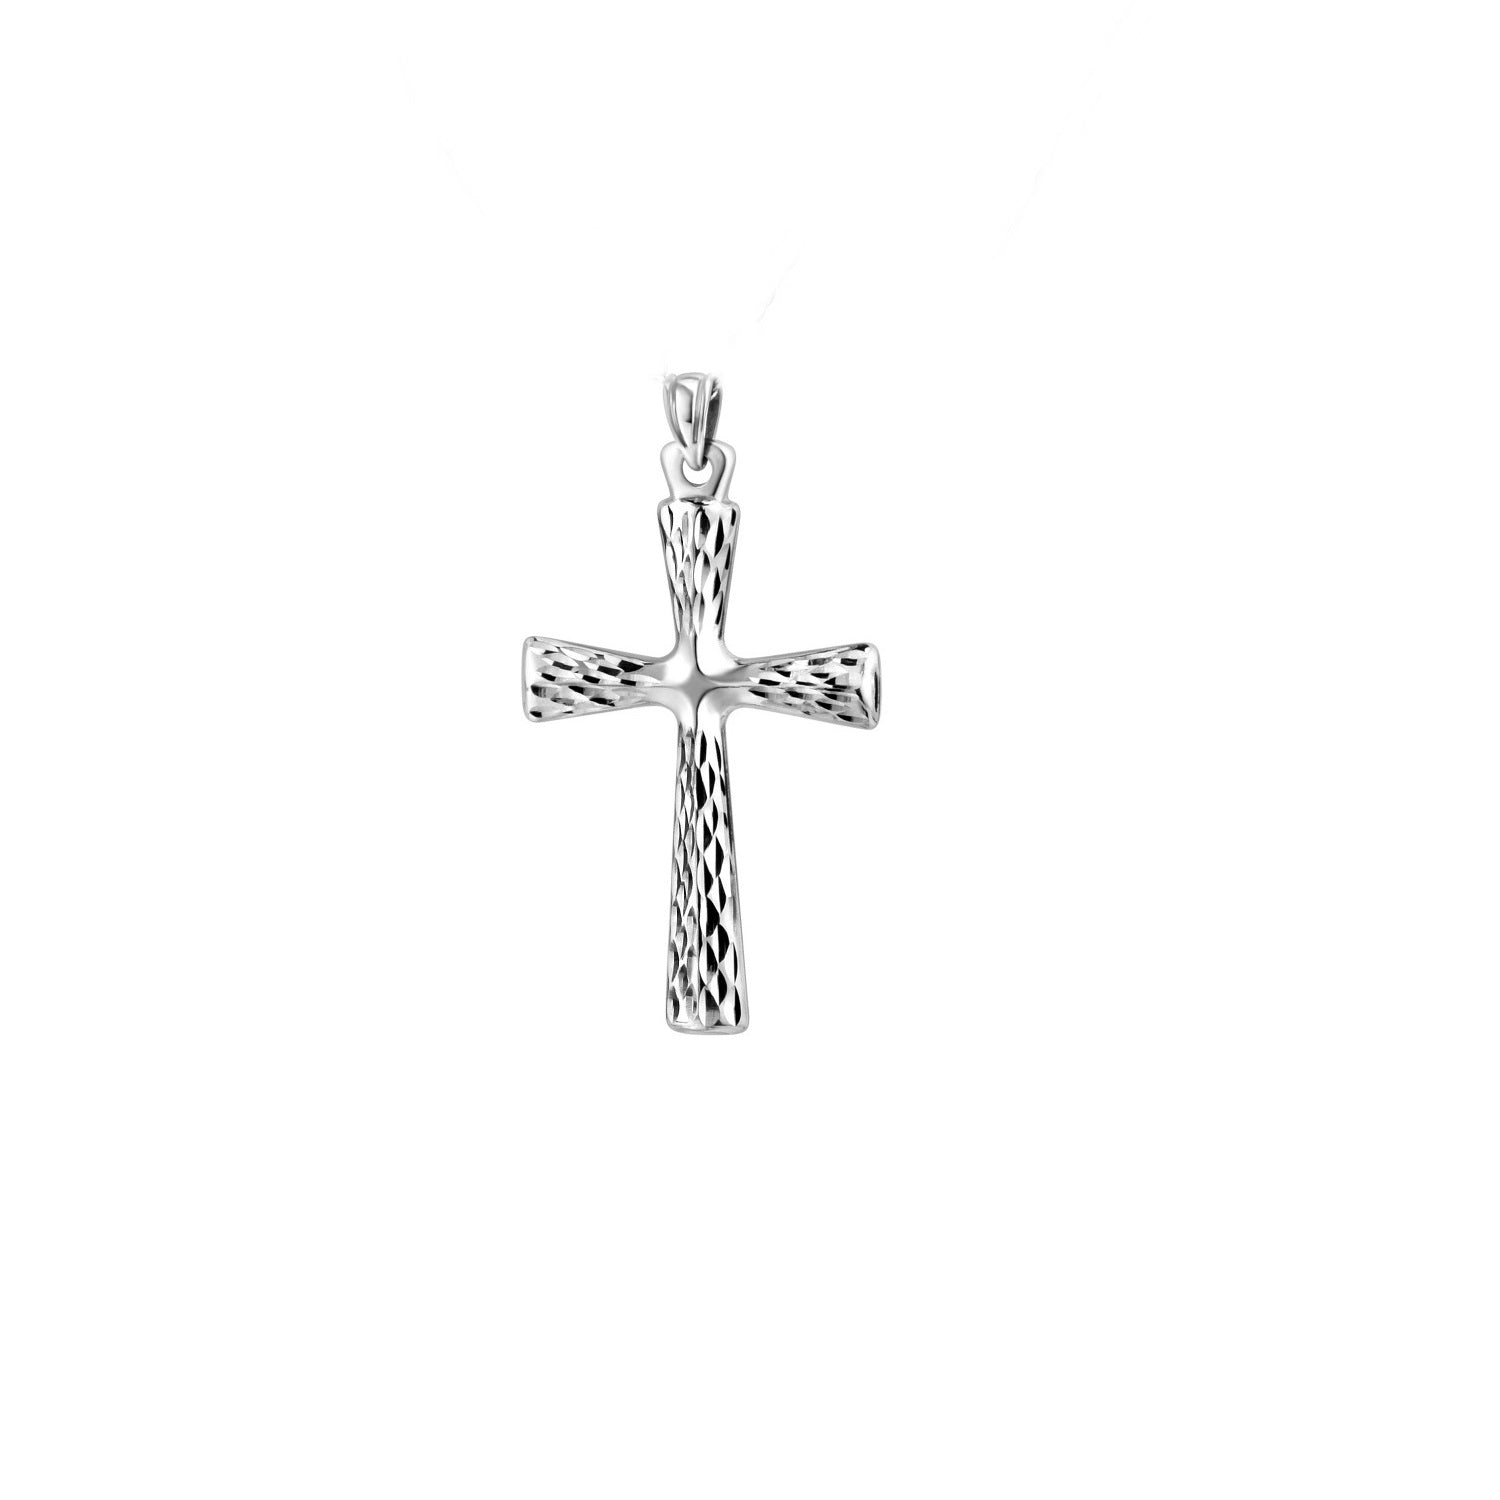 925 STERLING SILVER CLASSIC CROSS PENDANT WITH DIAMOND CUT 30.0 MM. F39451